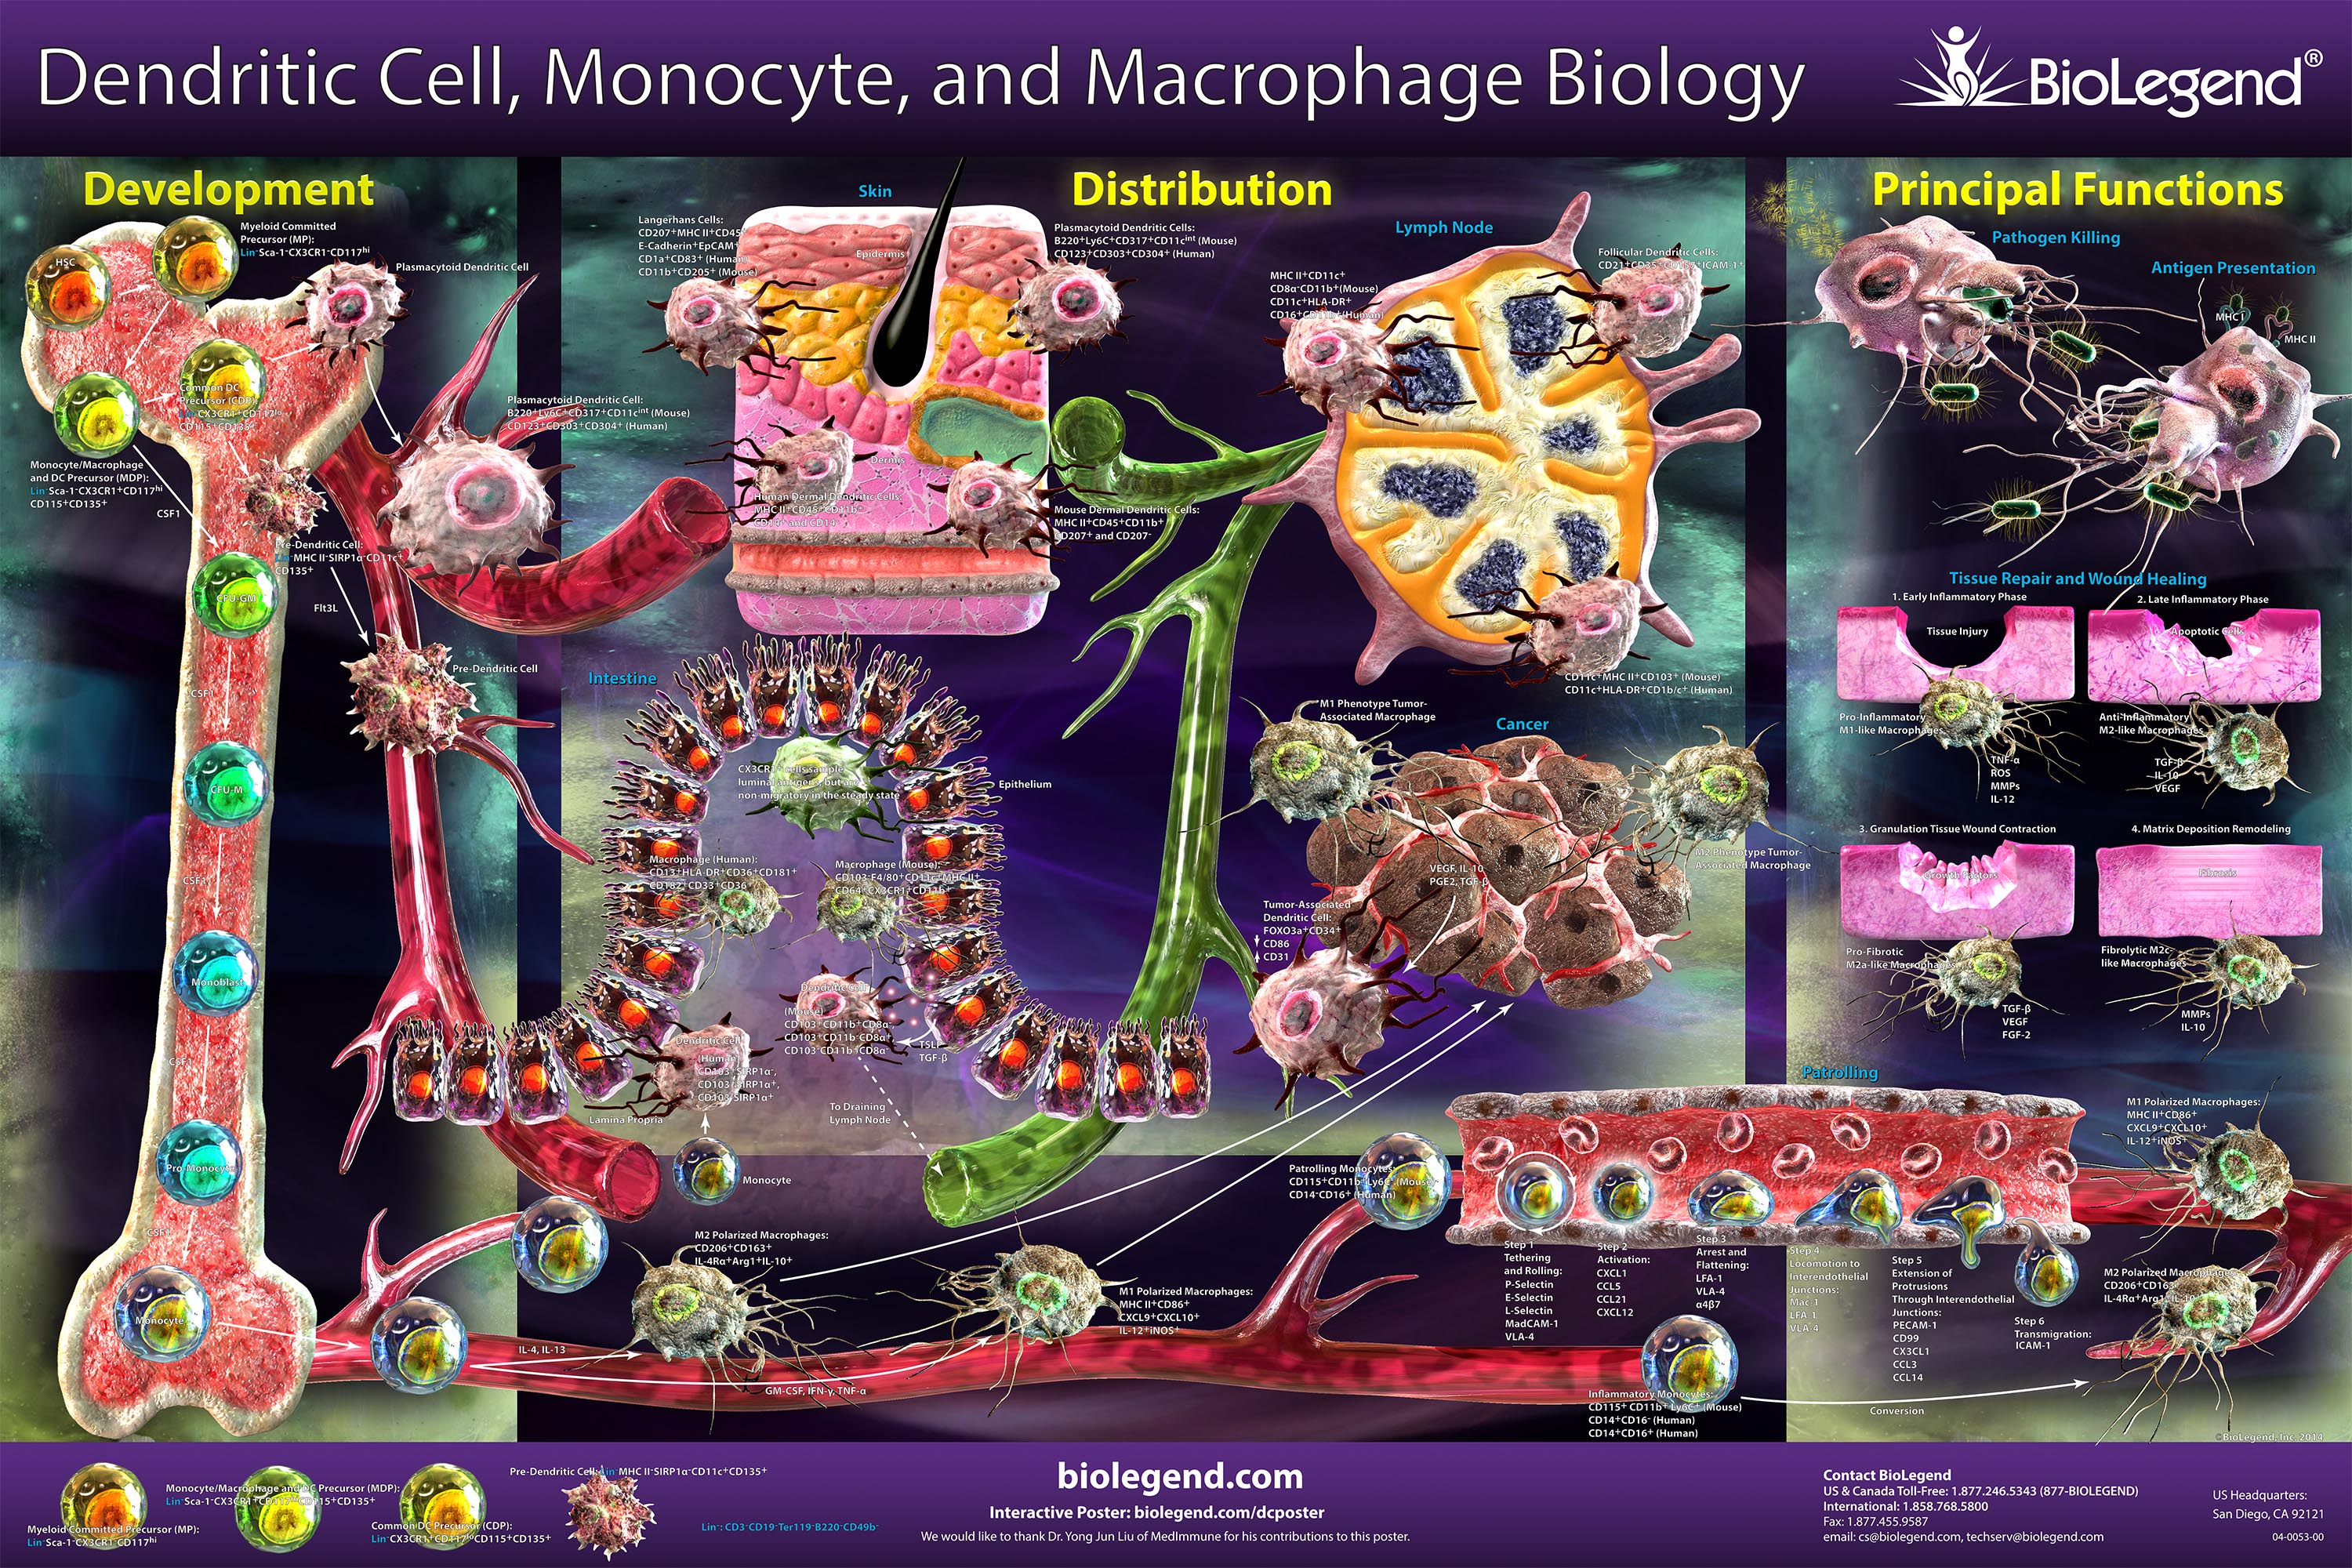 Dendritic Cell, Monocyte, and Macrophage Biology